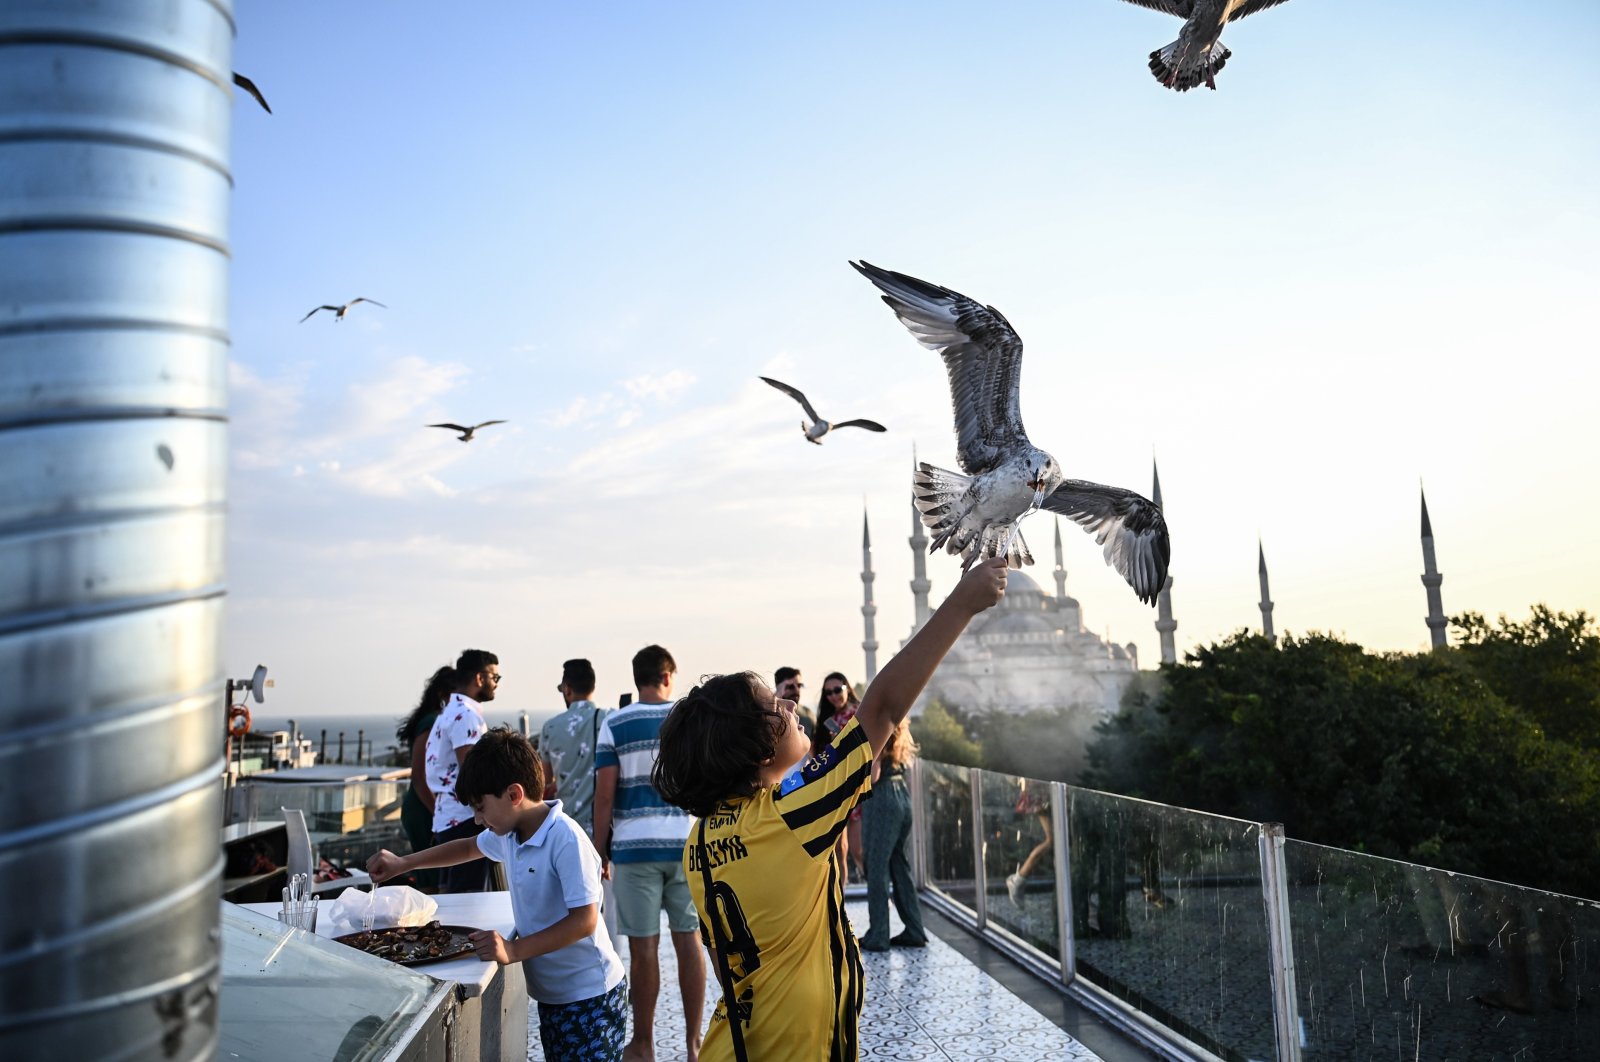 A young tourist feeds a seagull on a terrace in the historic Sultanahmet area with a backdrop of the Blue Mosque, Istanbul, Türkiye, Aug. 21, 2023. (IHA Photo)